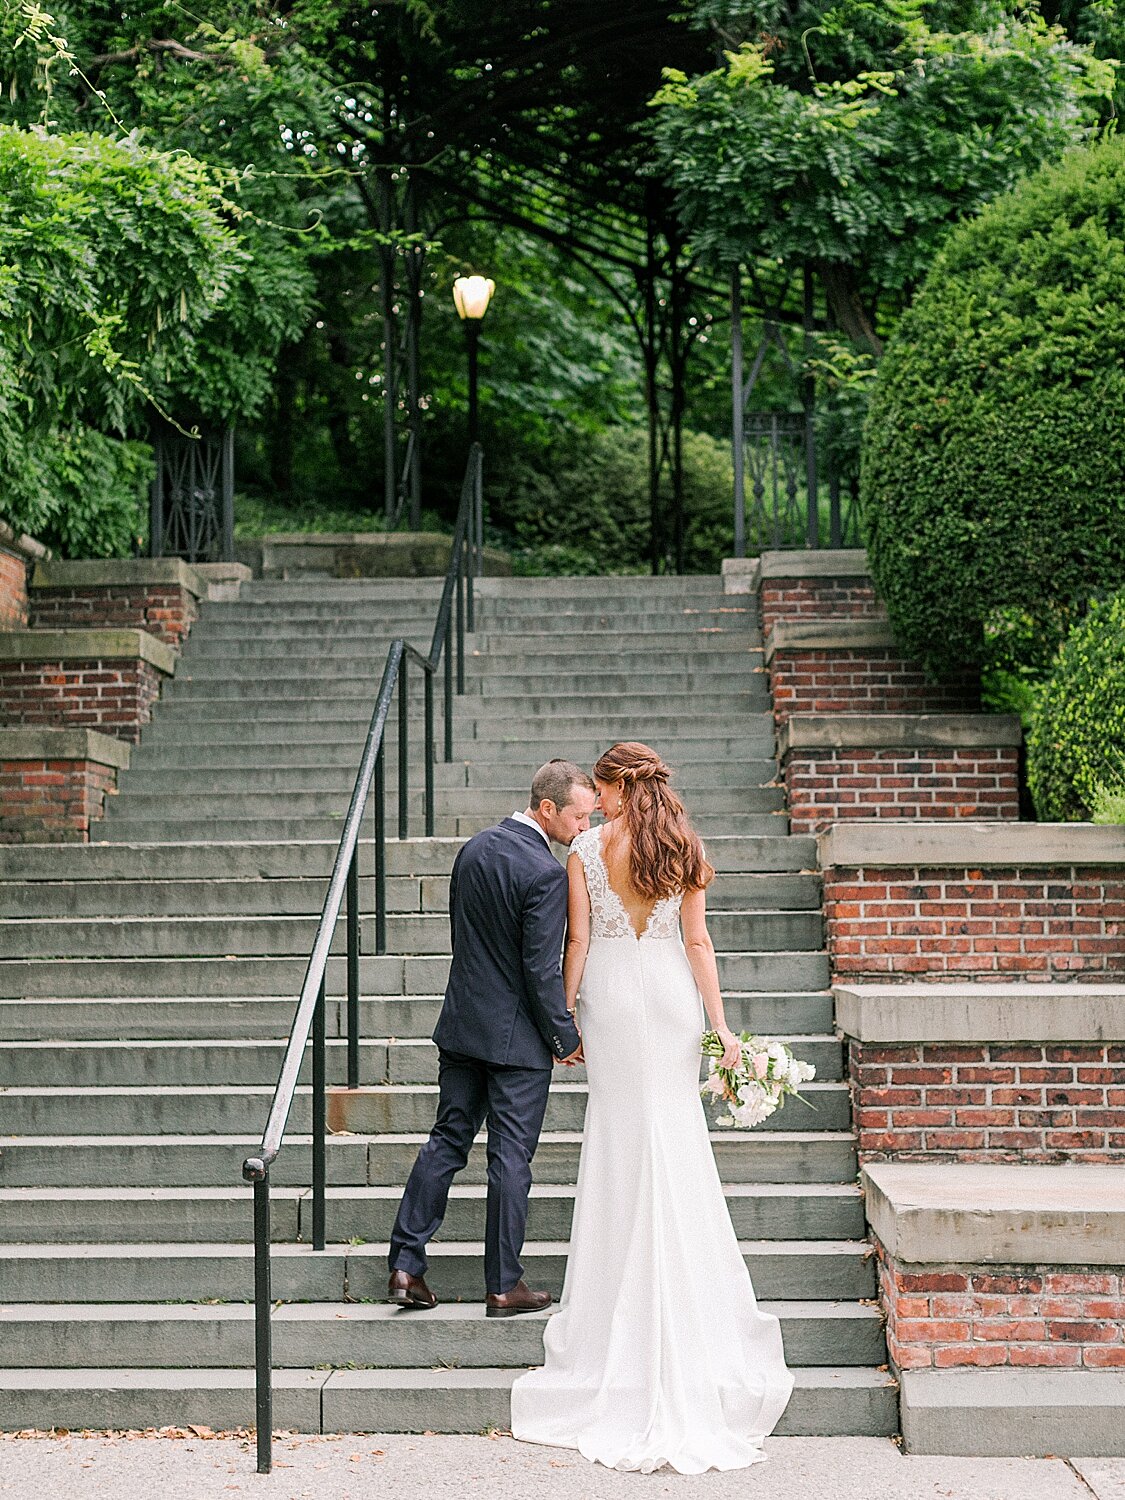 Elopement at the Central Park Conservatory Gardens_Asher Gardner Photography__0068.jpg